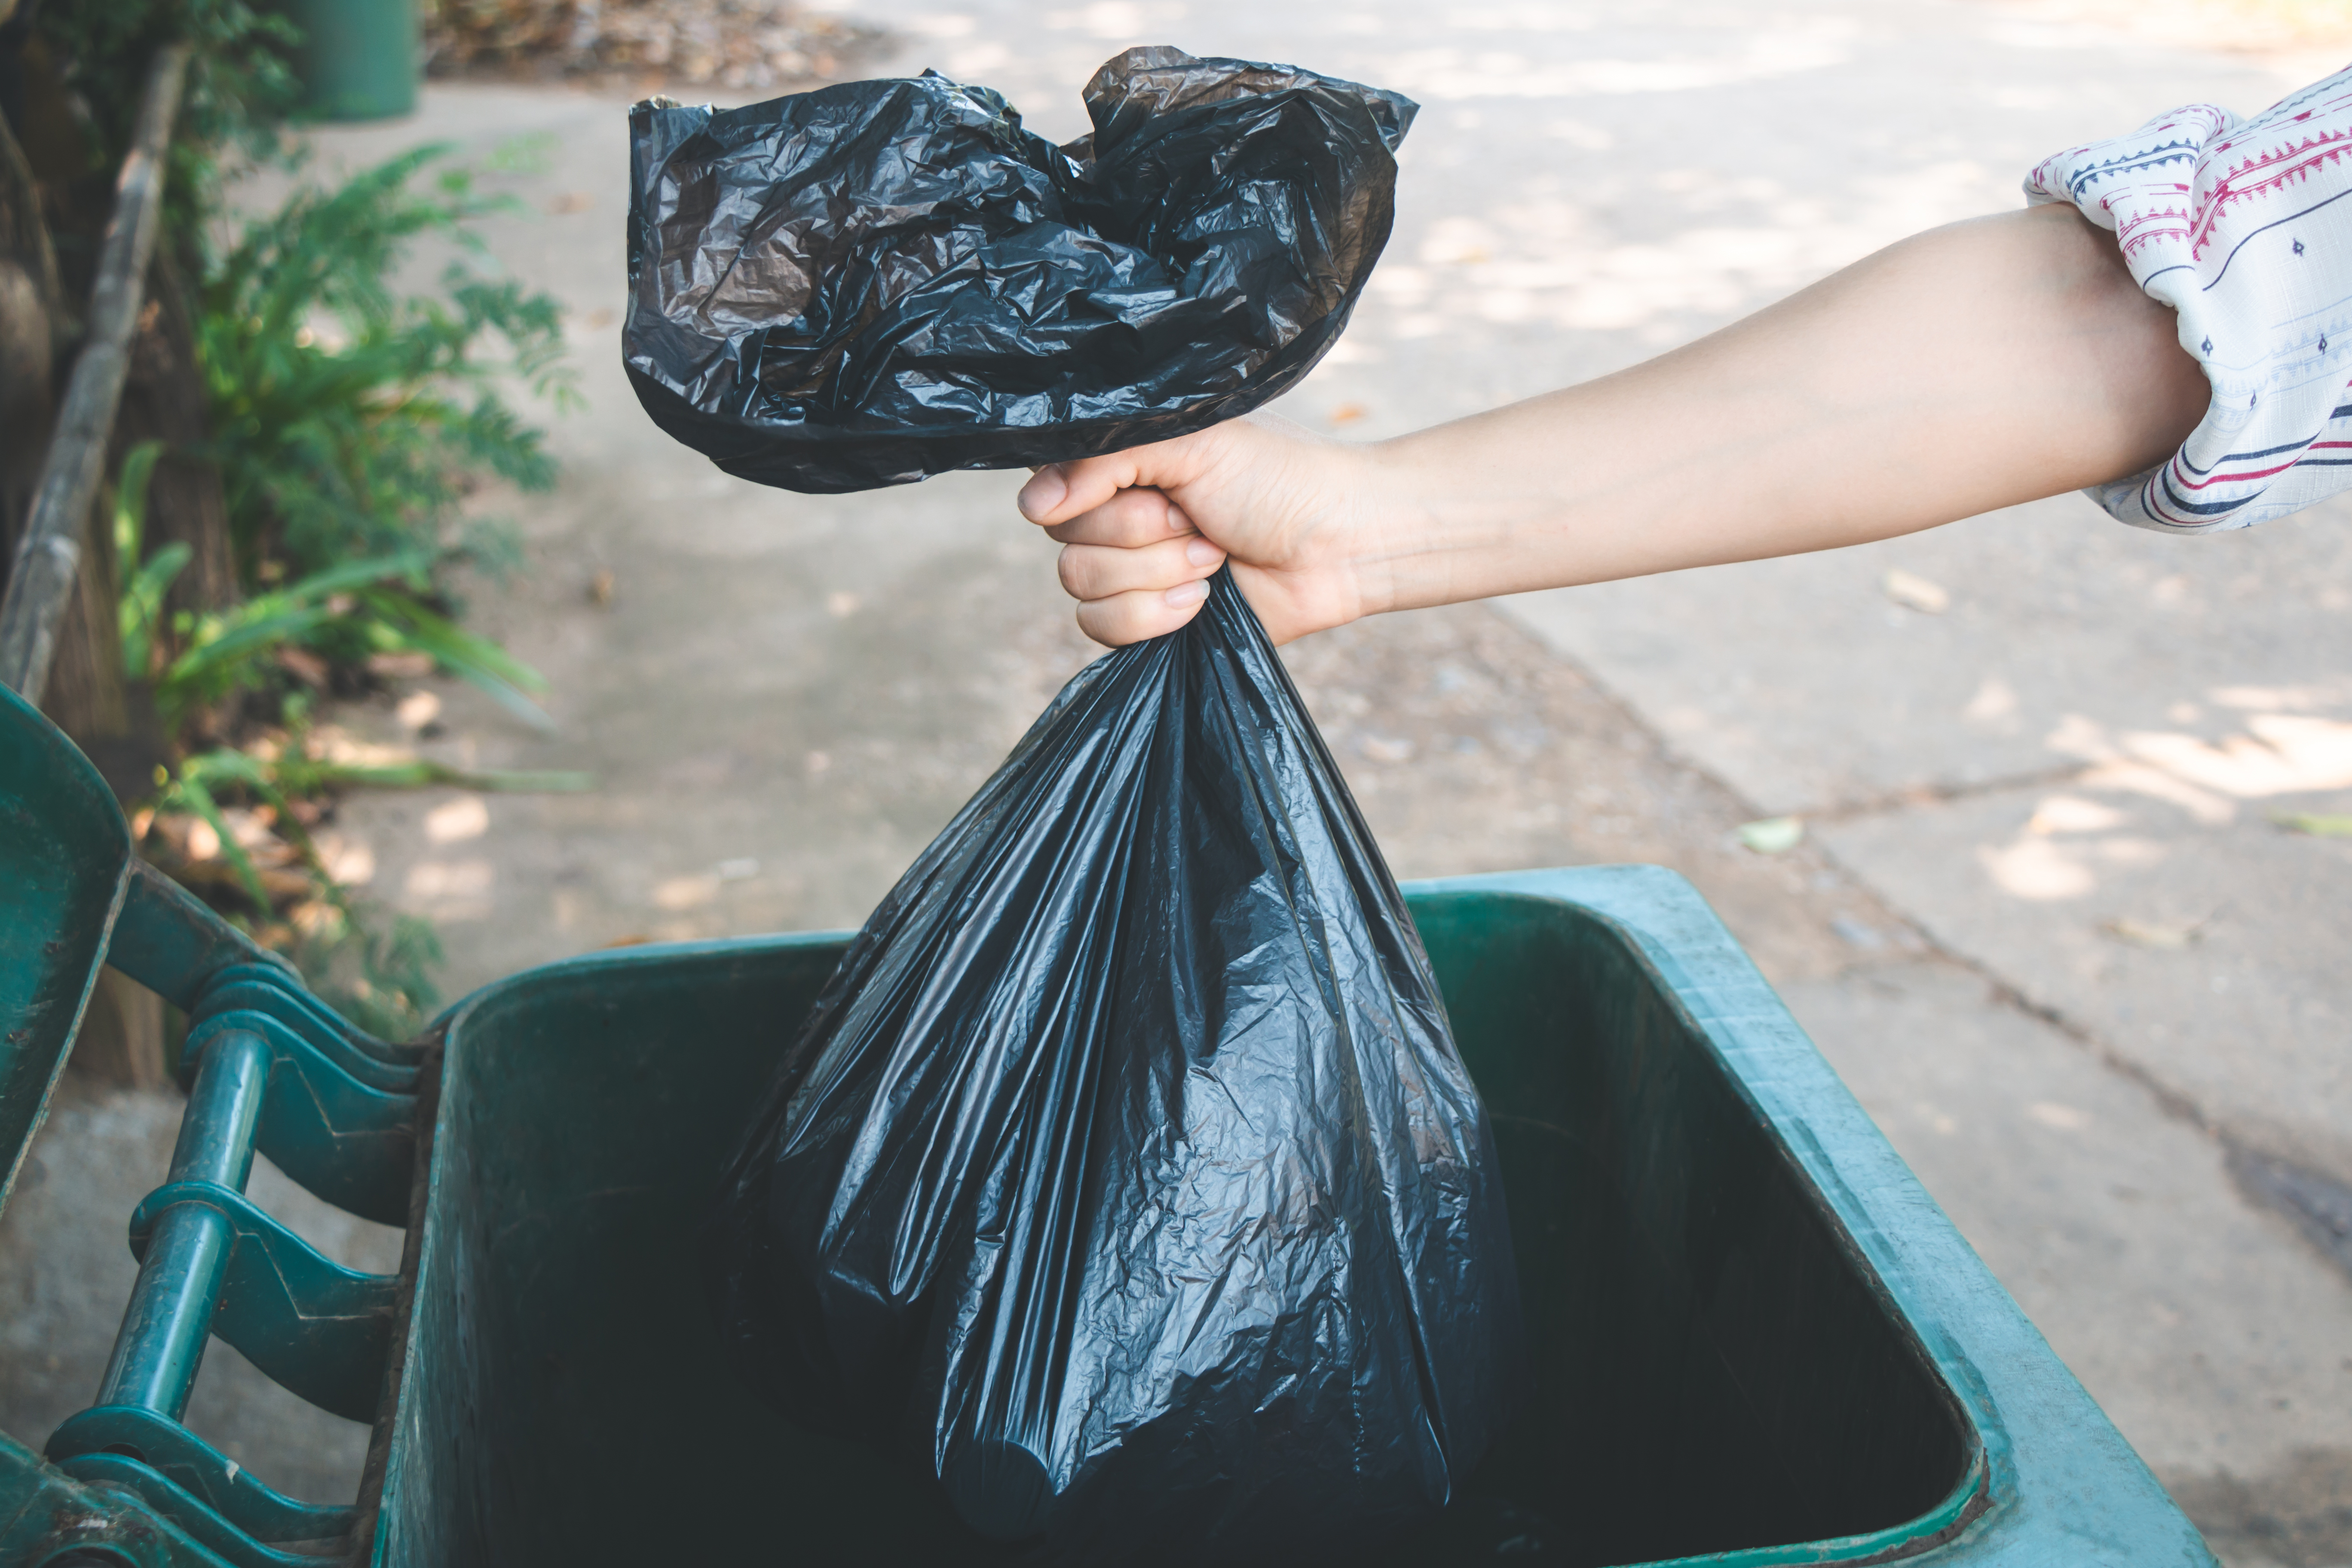 Trash bag liners keep your trash cans clean